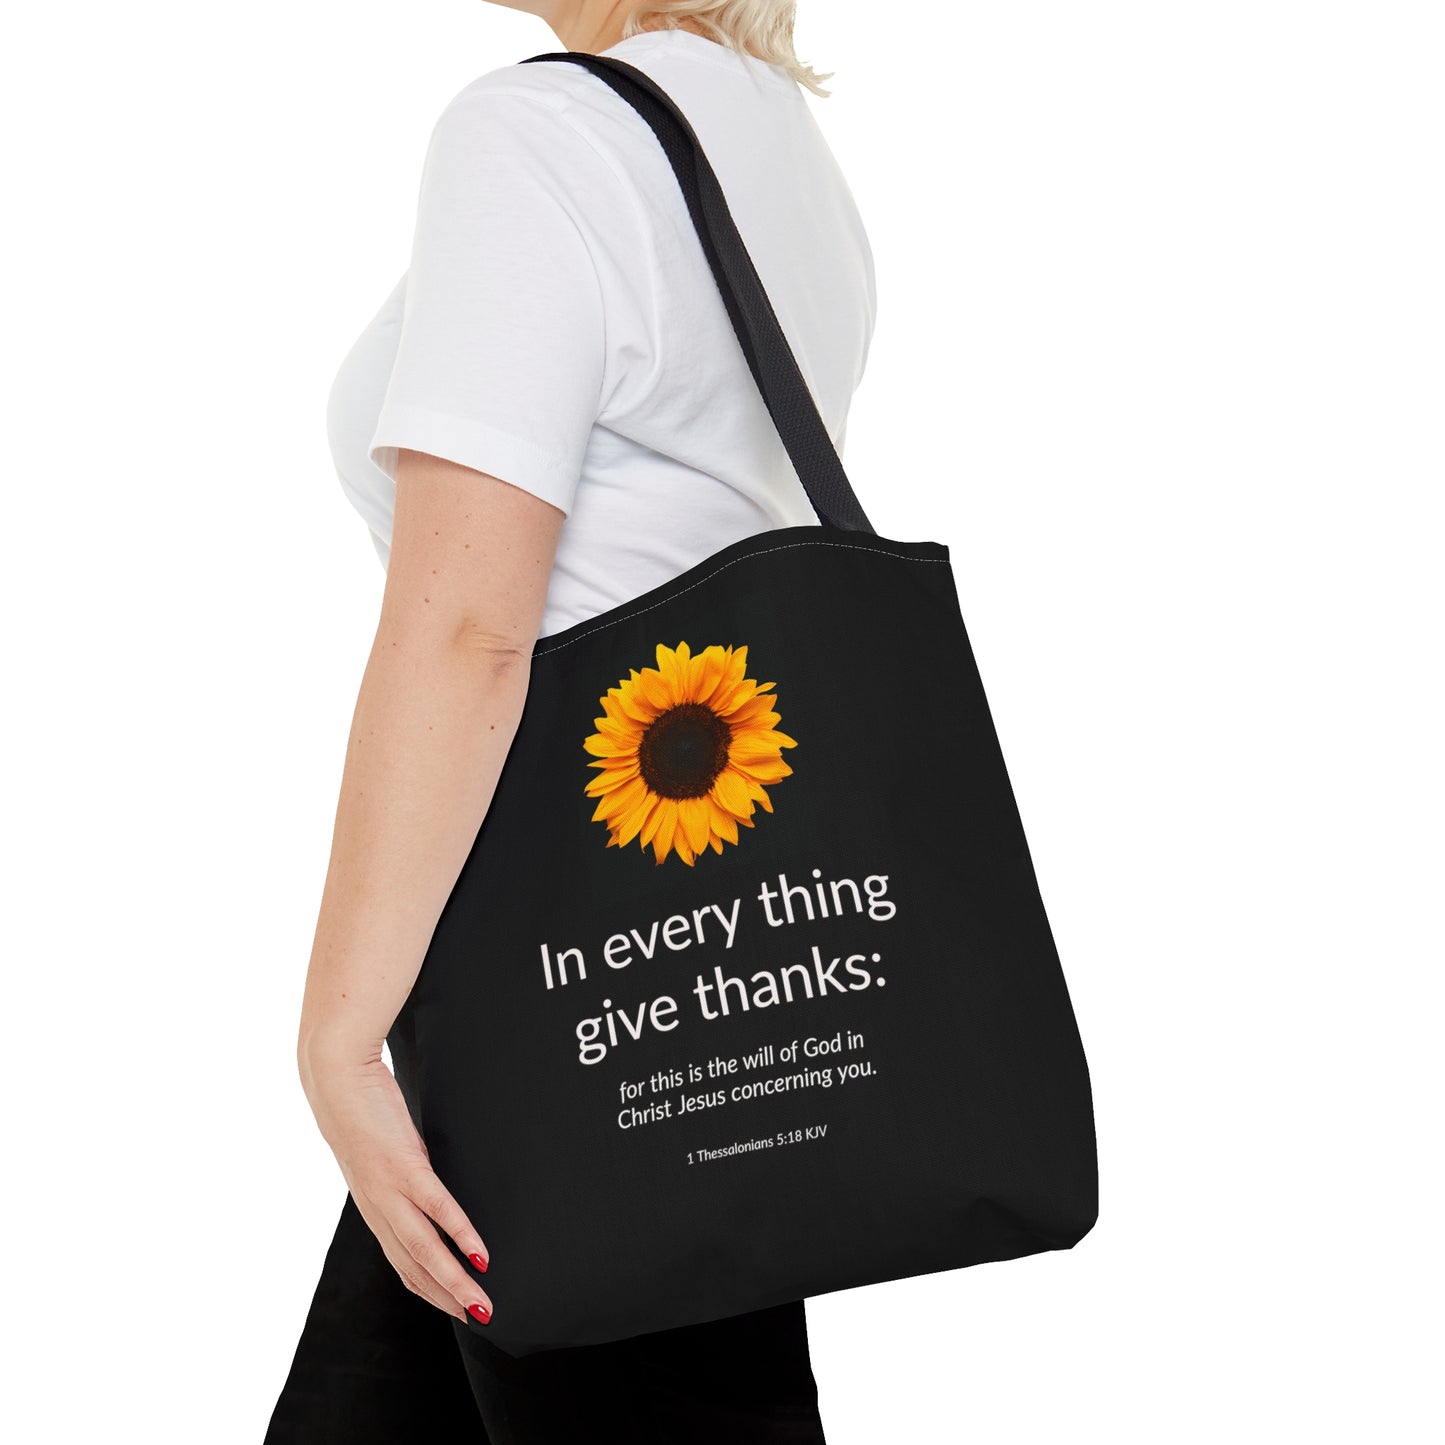 Tote Bag - In Everything Give Thanks